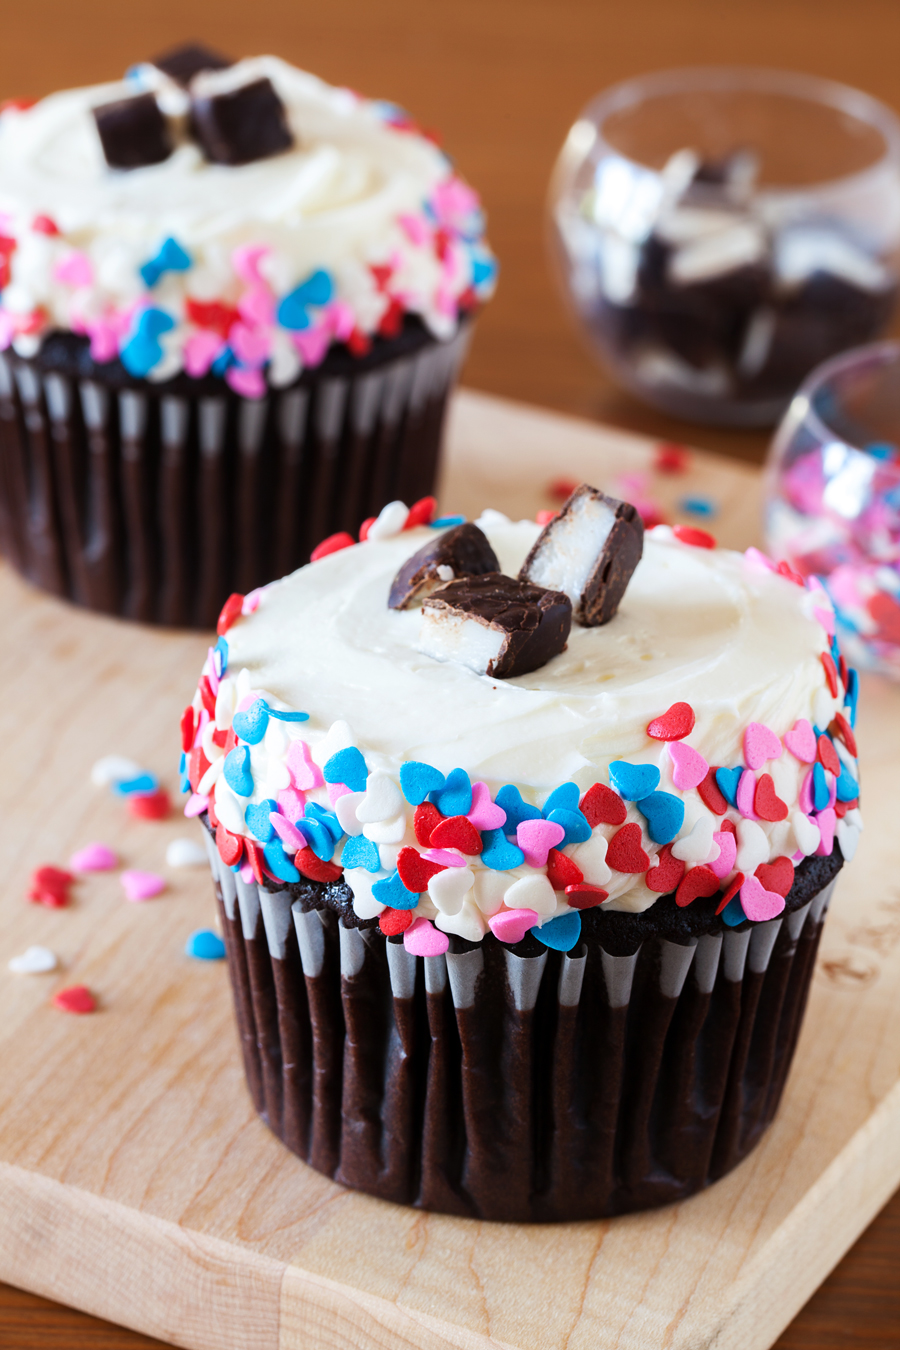 Two chocolate cupcakes with peppermint frosting and heart sprinkles.